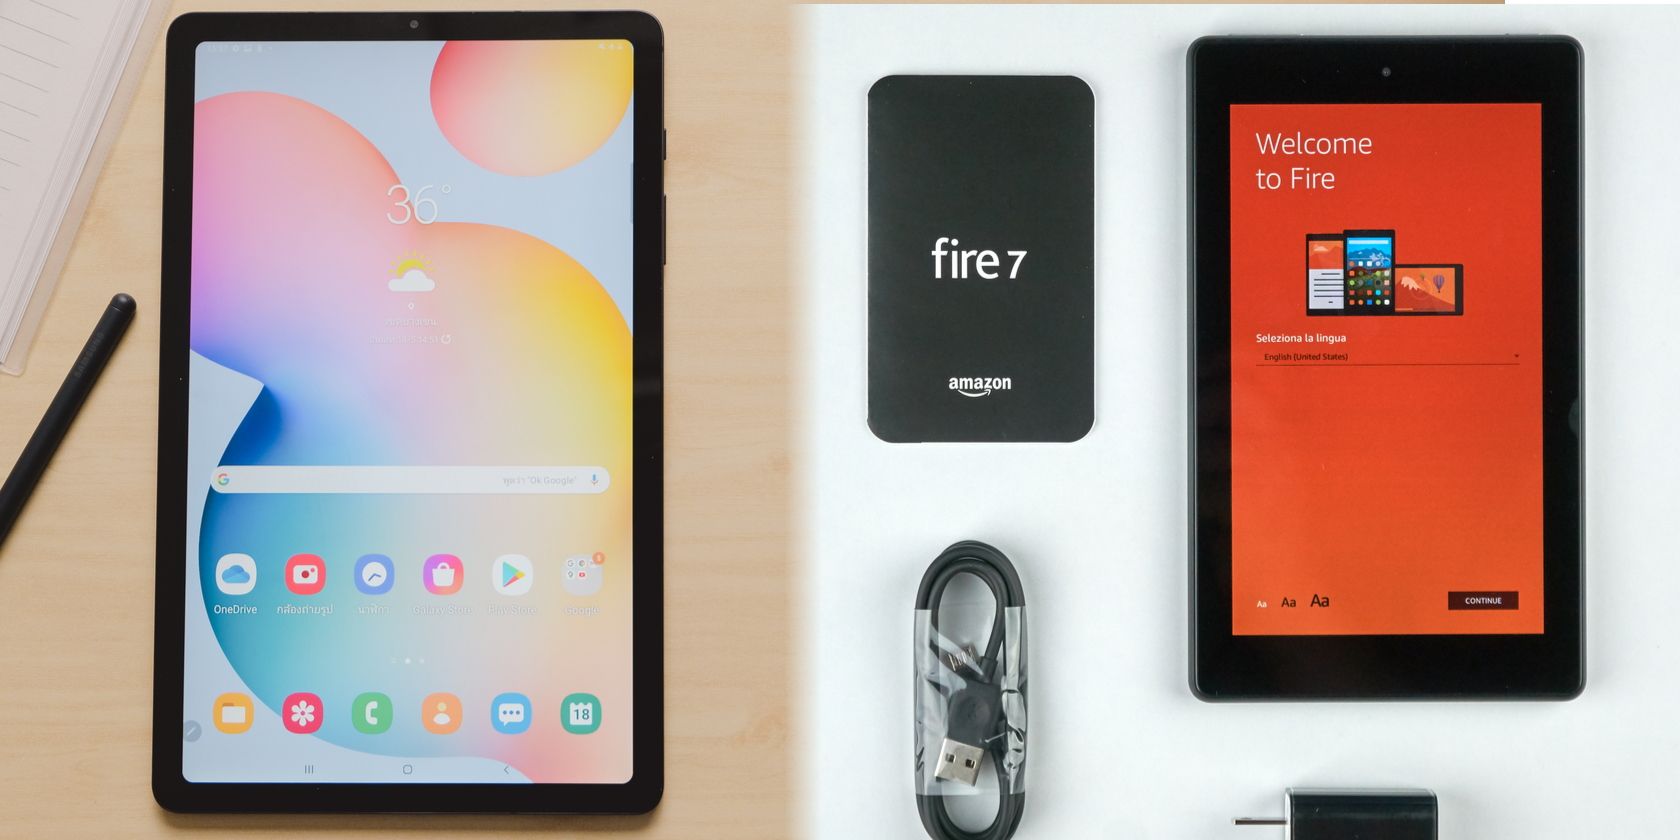 An Android tablet and a Fire tablet